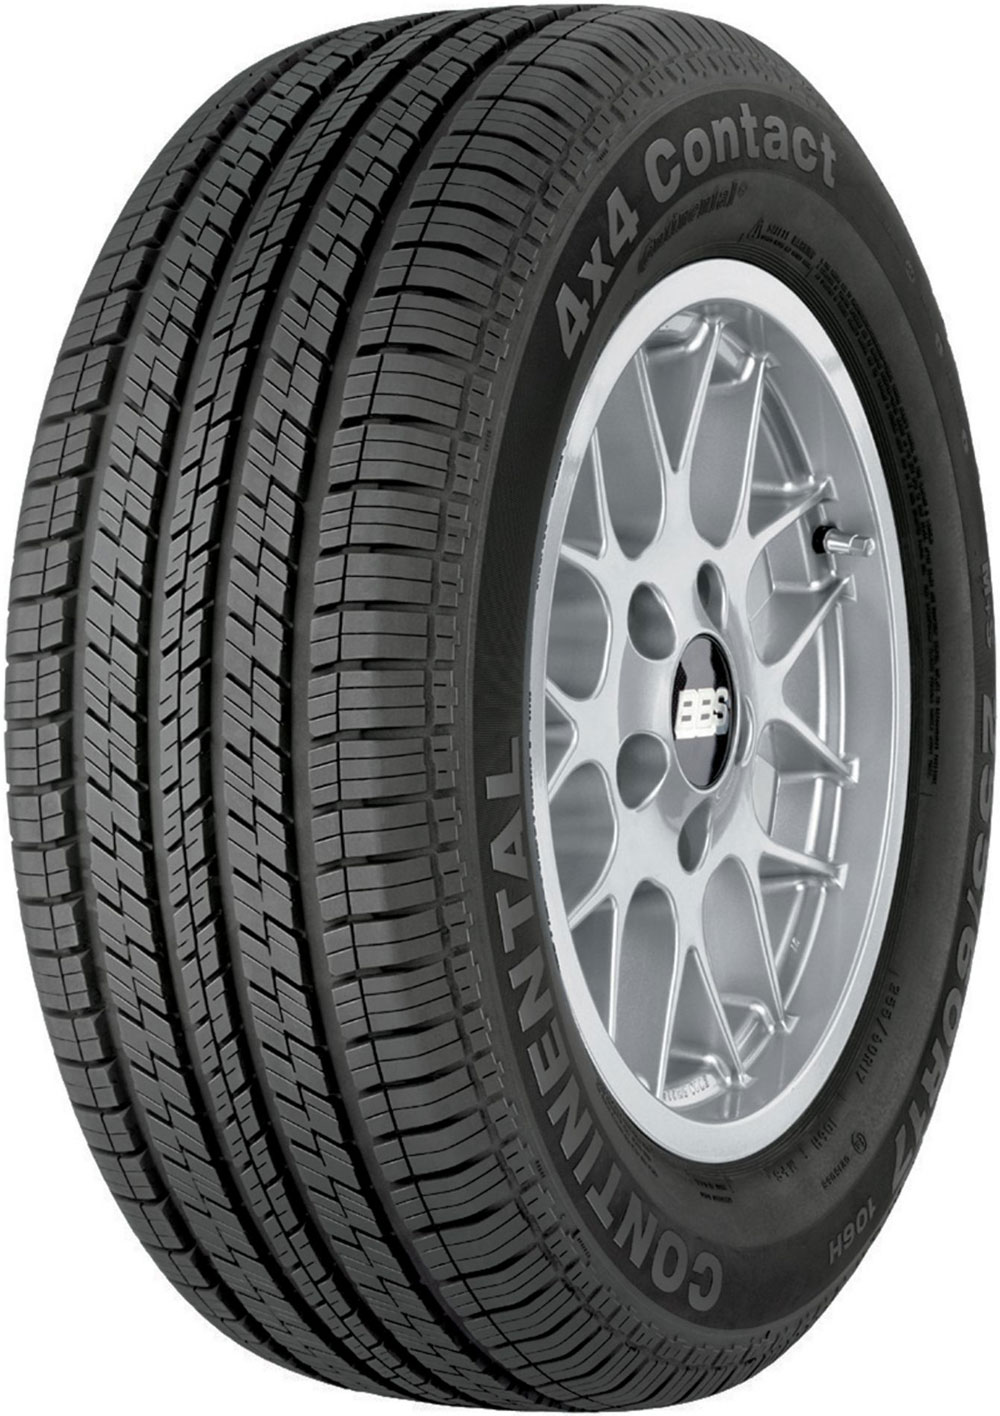 CONTINENTAL 4X4 CONTACT 205/80 R16 110S